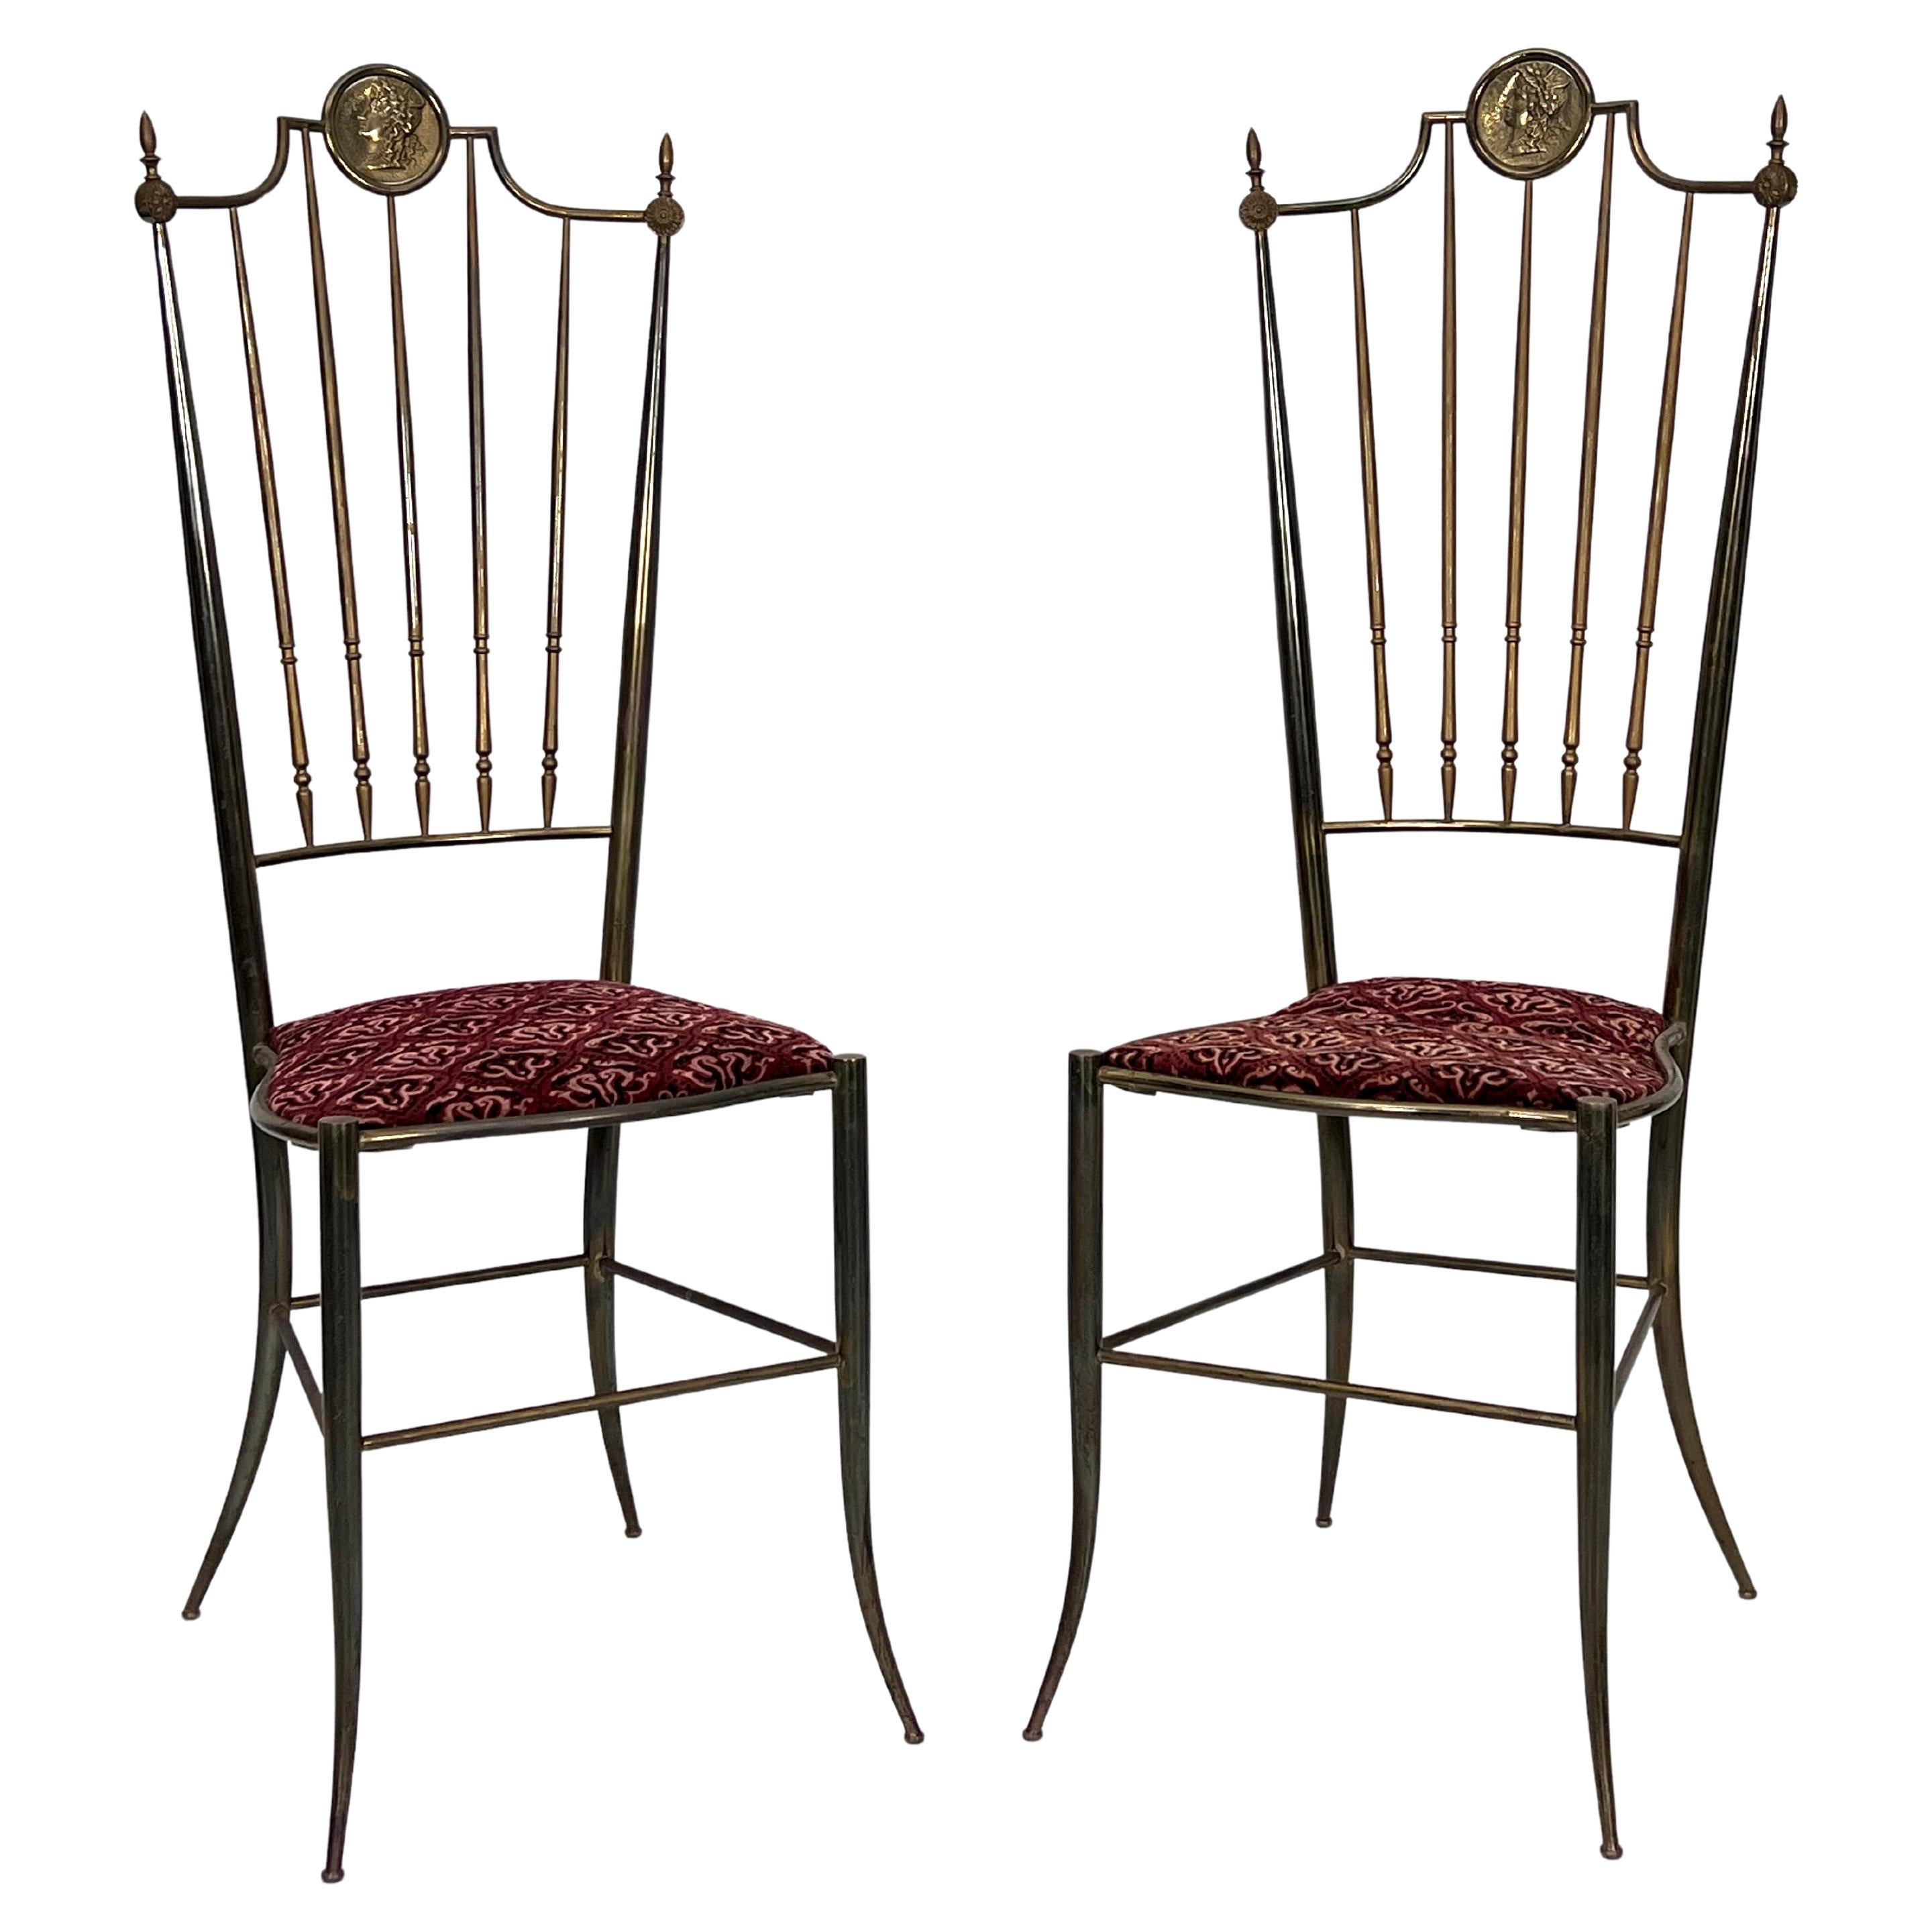 Vintage Pair of Brass Tall Chairs from Chiavari, Italy, 1950s